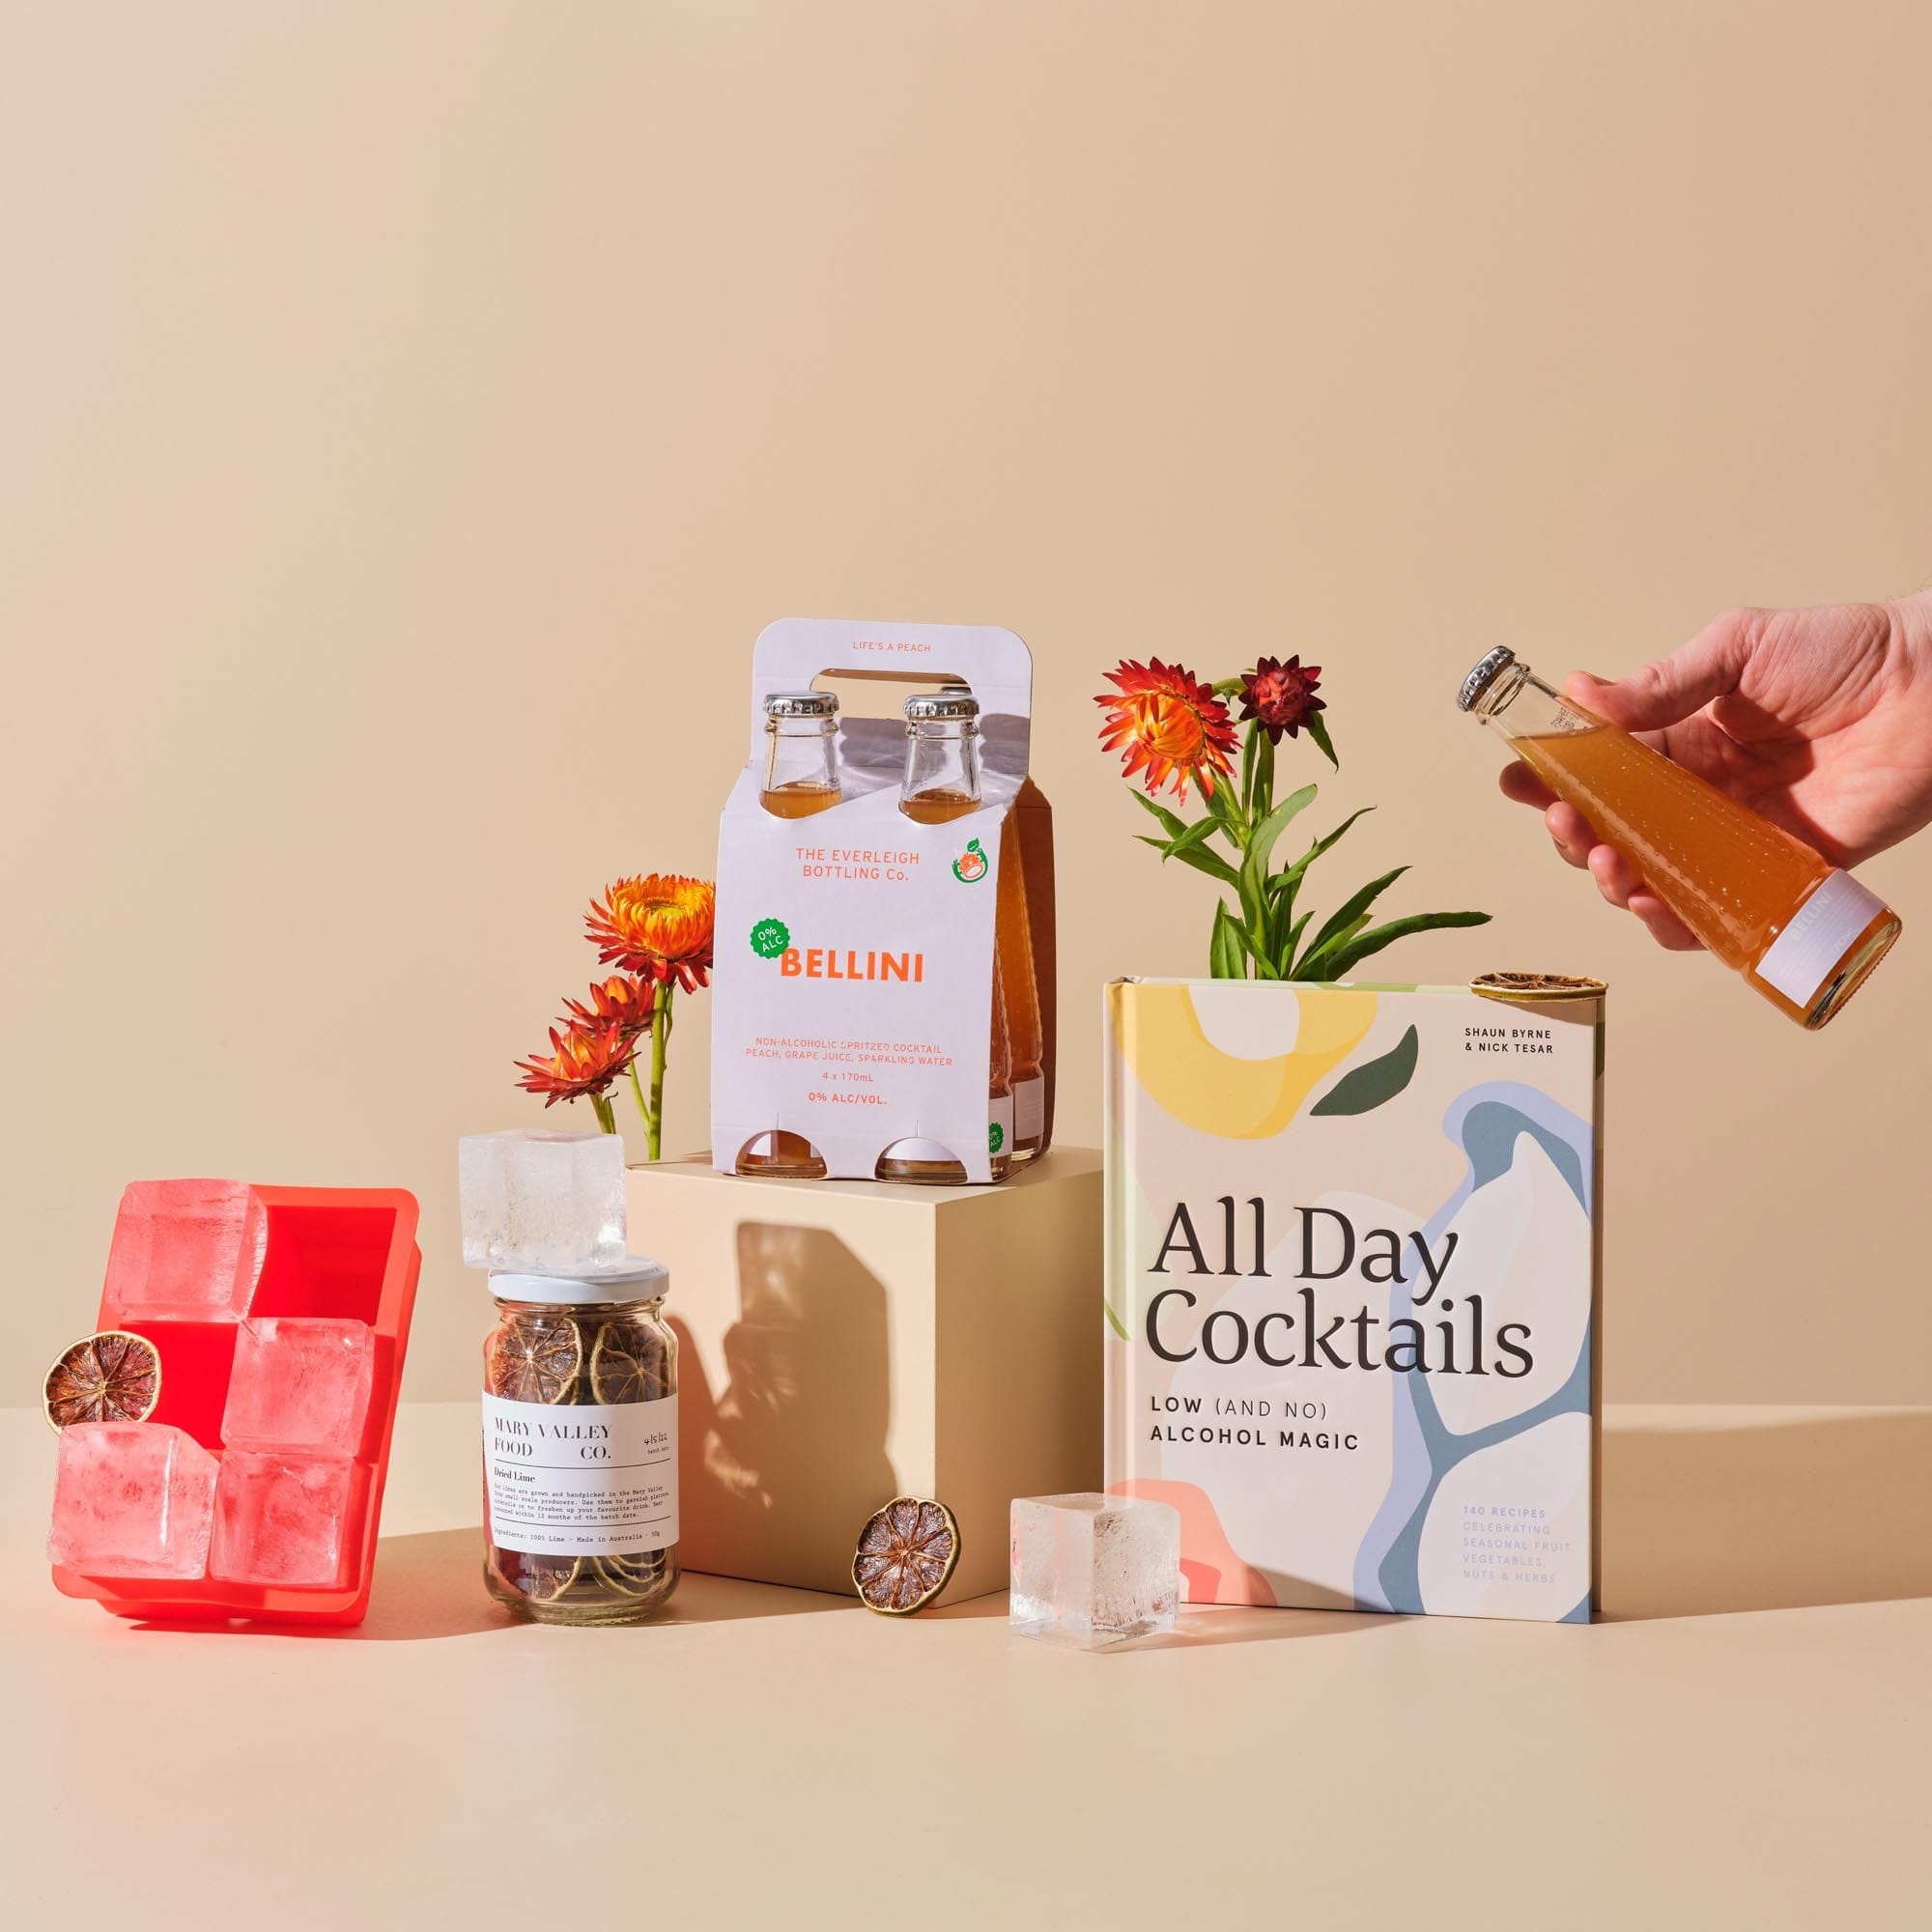 This is the Designated Driver bundle from Handsel. Included in this image is All Day Cocktails, Dried Lime Garnish, %0 Bellini 4 pack and an Ice cube tray